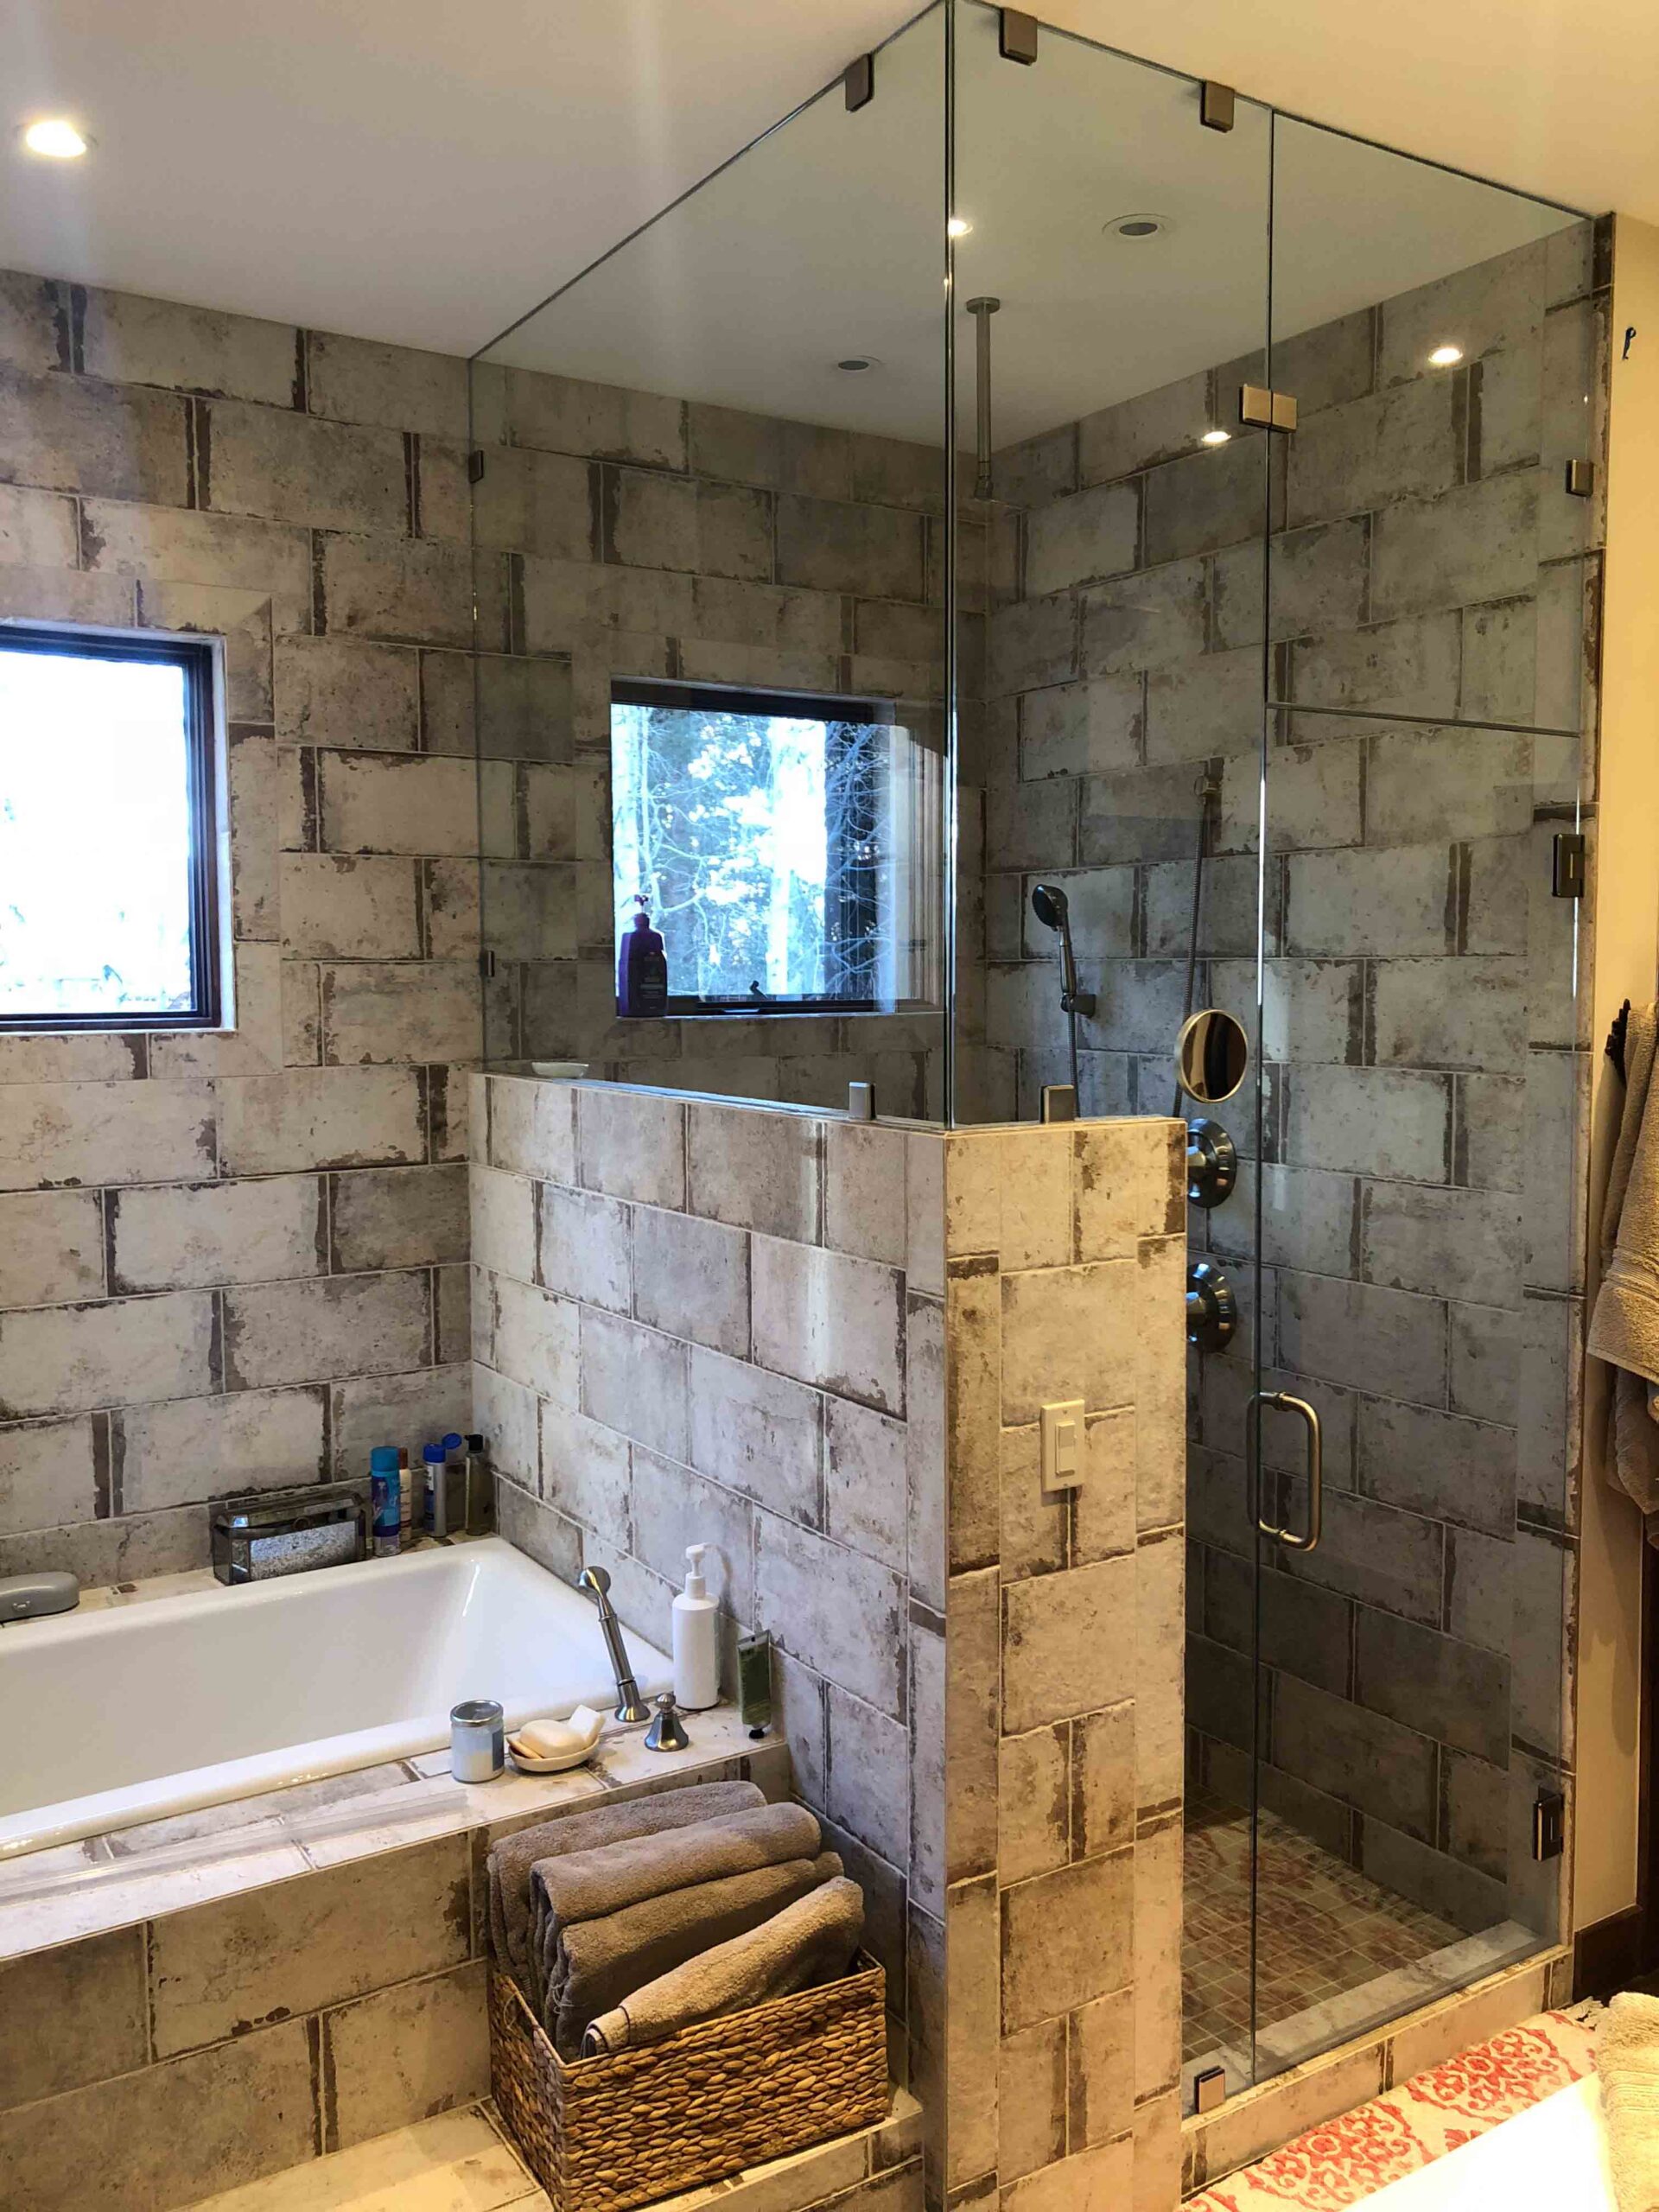 Animas glass residential shower remodeling and installation